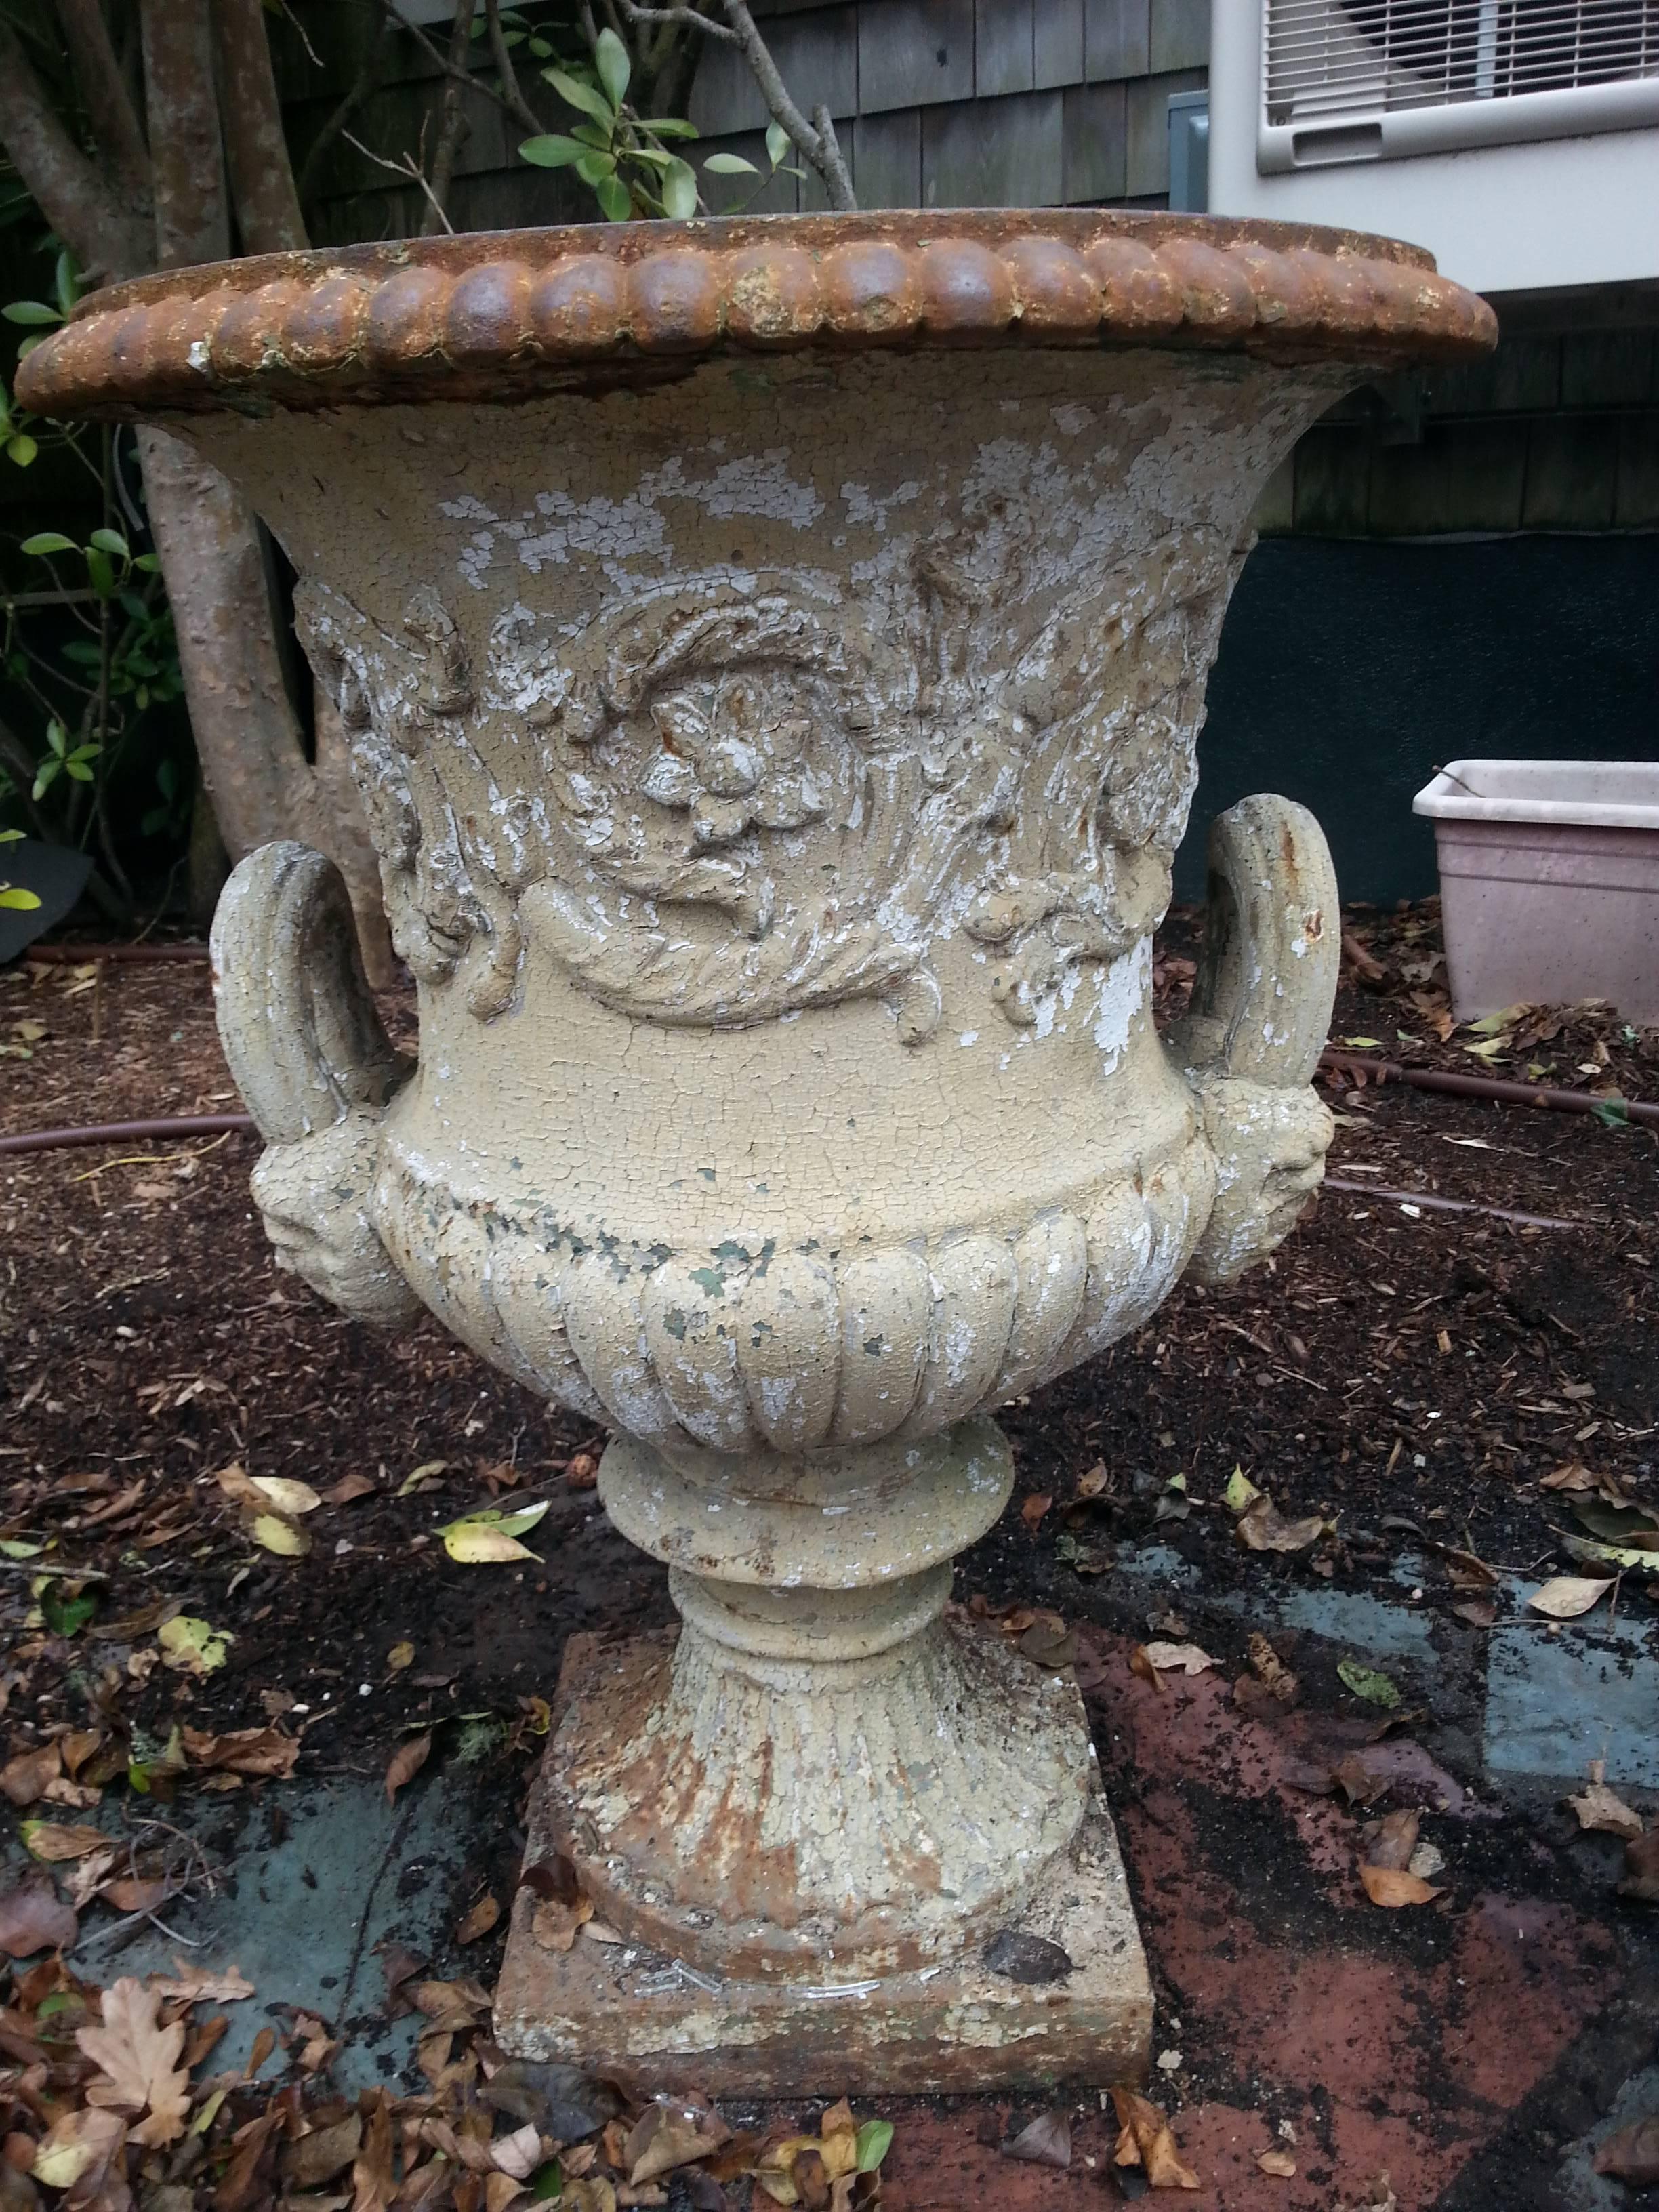 Iron garden urn with painted outside. Beautiful motifs with faces on handles.